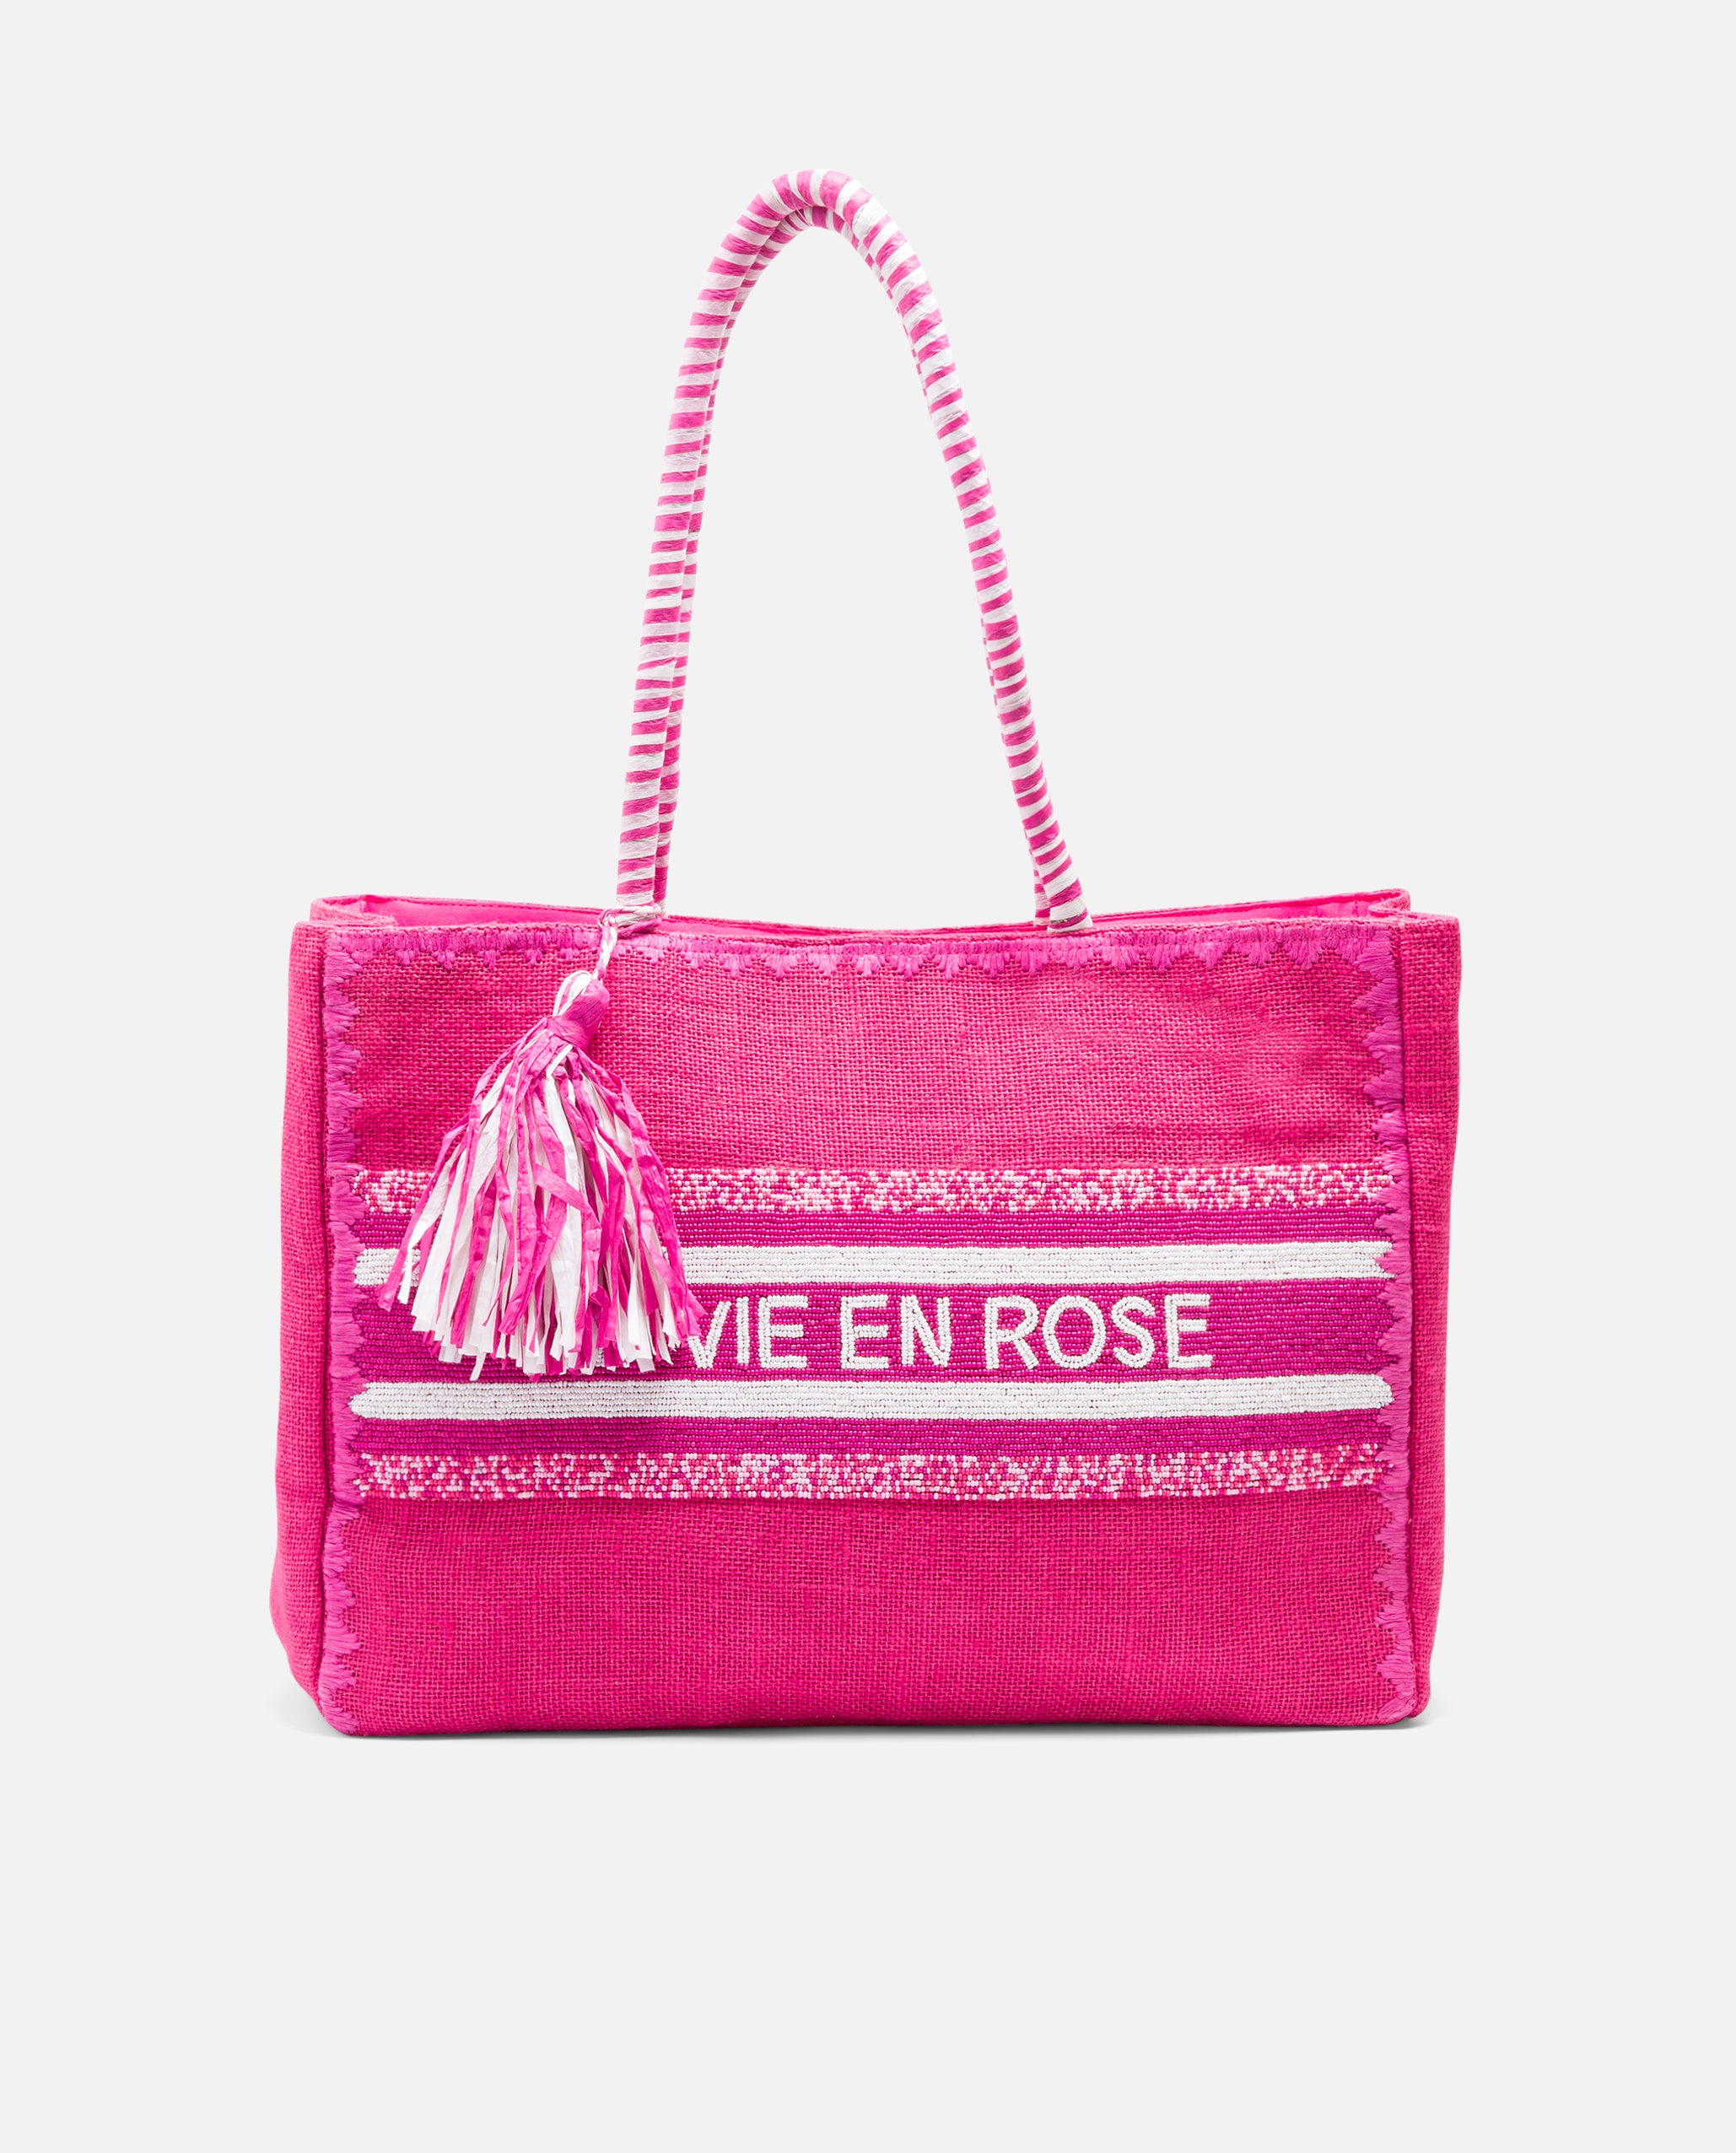 NUR ITALY CUPLE Lola Pink Beaded Bag, color, WHIITE AND PINK